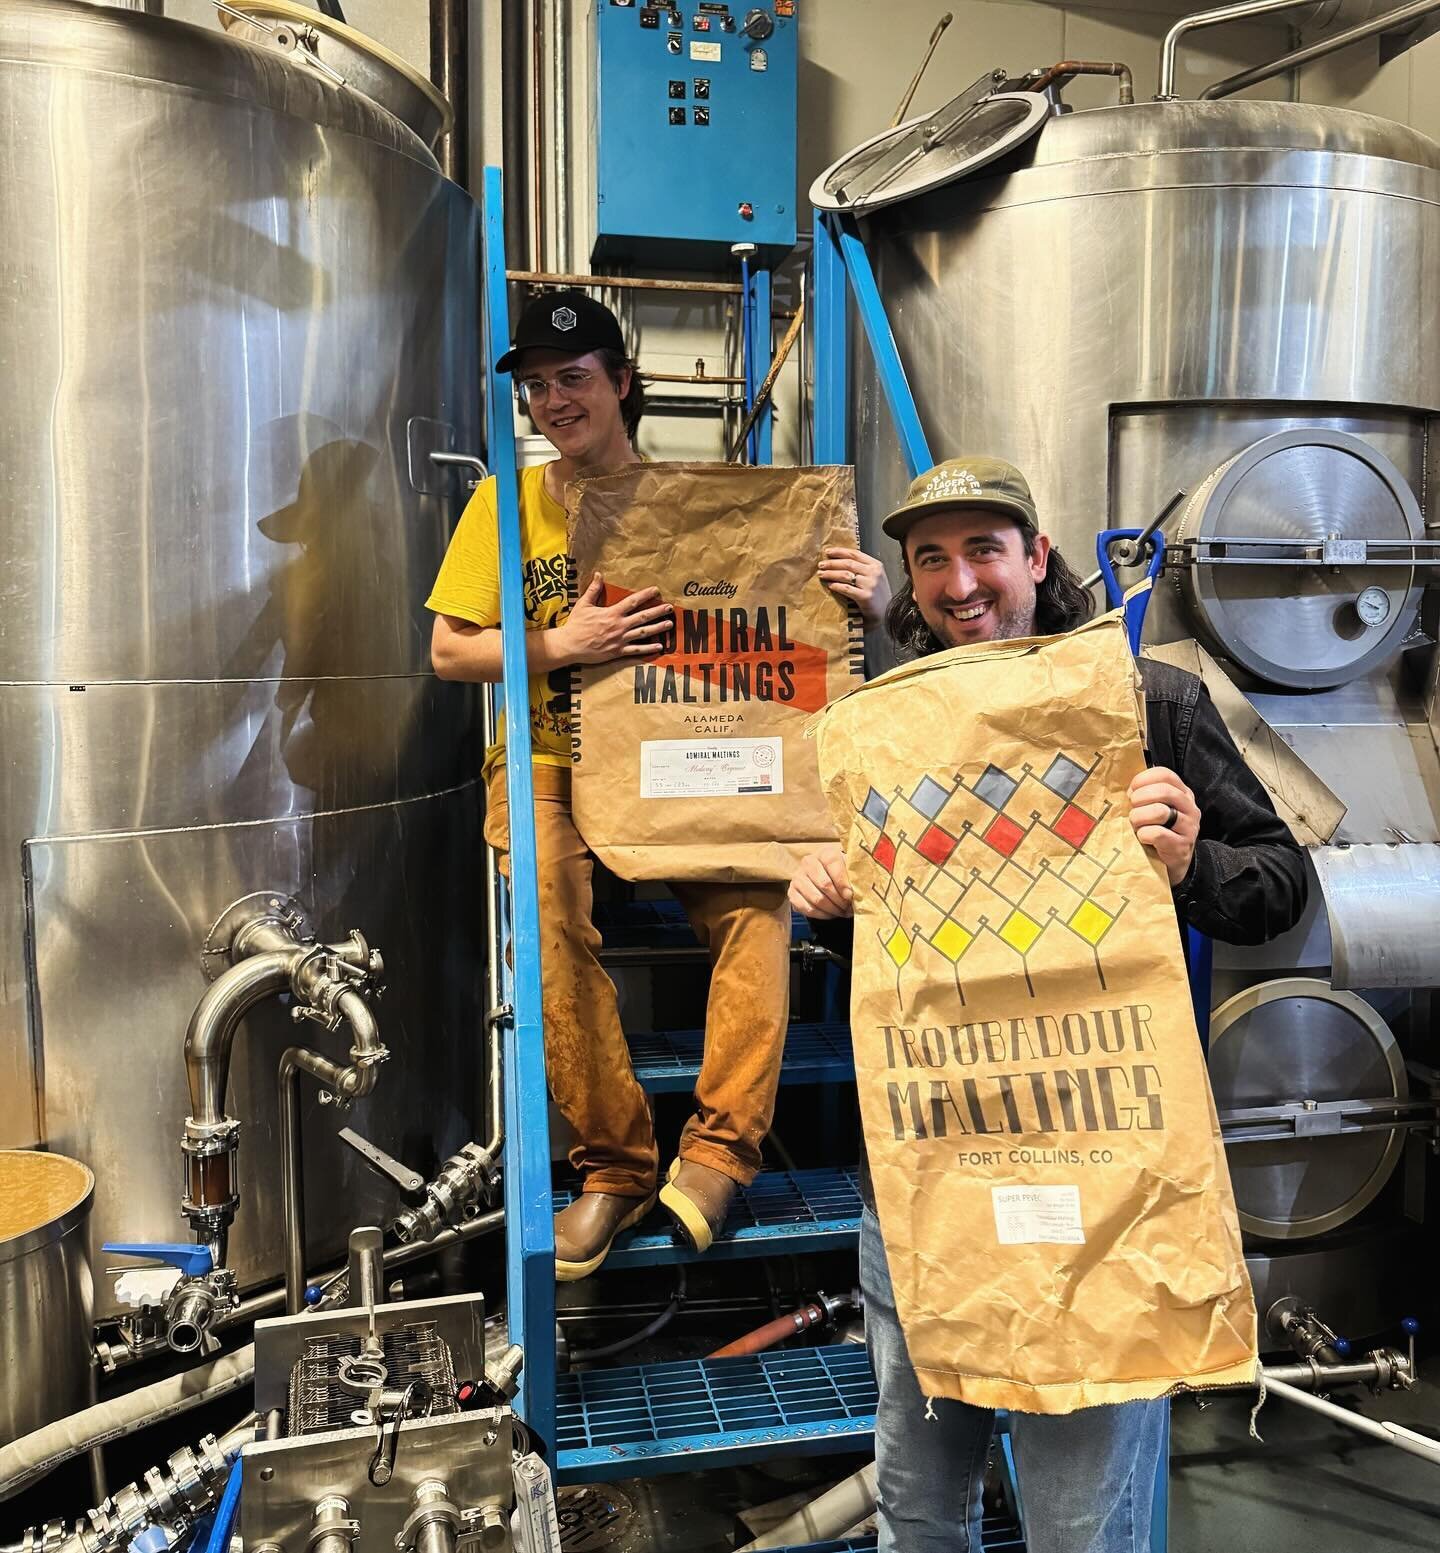 For all of you out in San Francisco, keep an eye out for Cohesion over the next few weeks! We were able to brew with @olfactorybrewing back in December, and are excited that our collab, Vysok&yacute; 13&deg;, a lighter tmav&eacute; made with both @tr